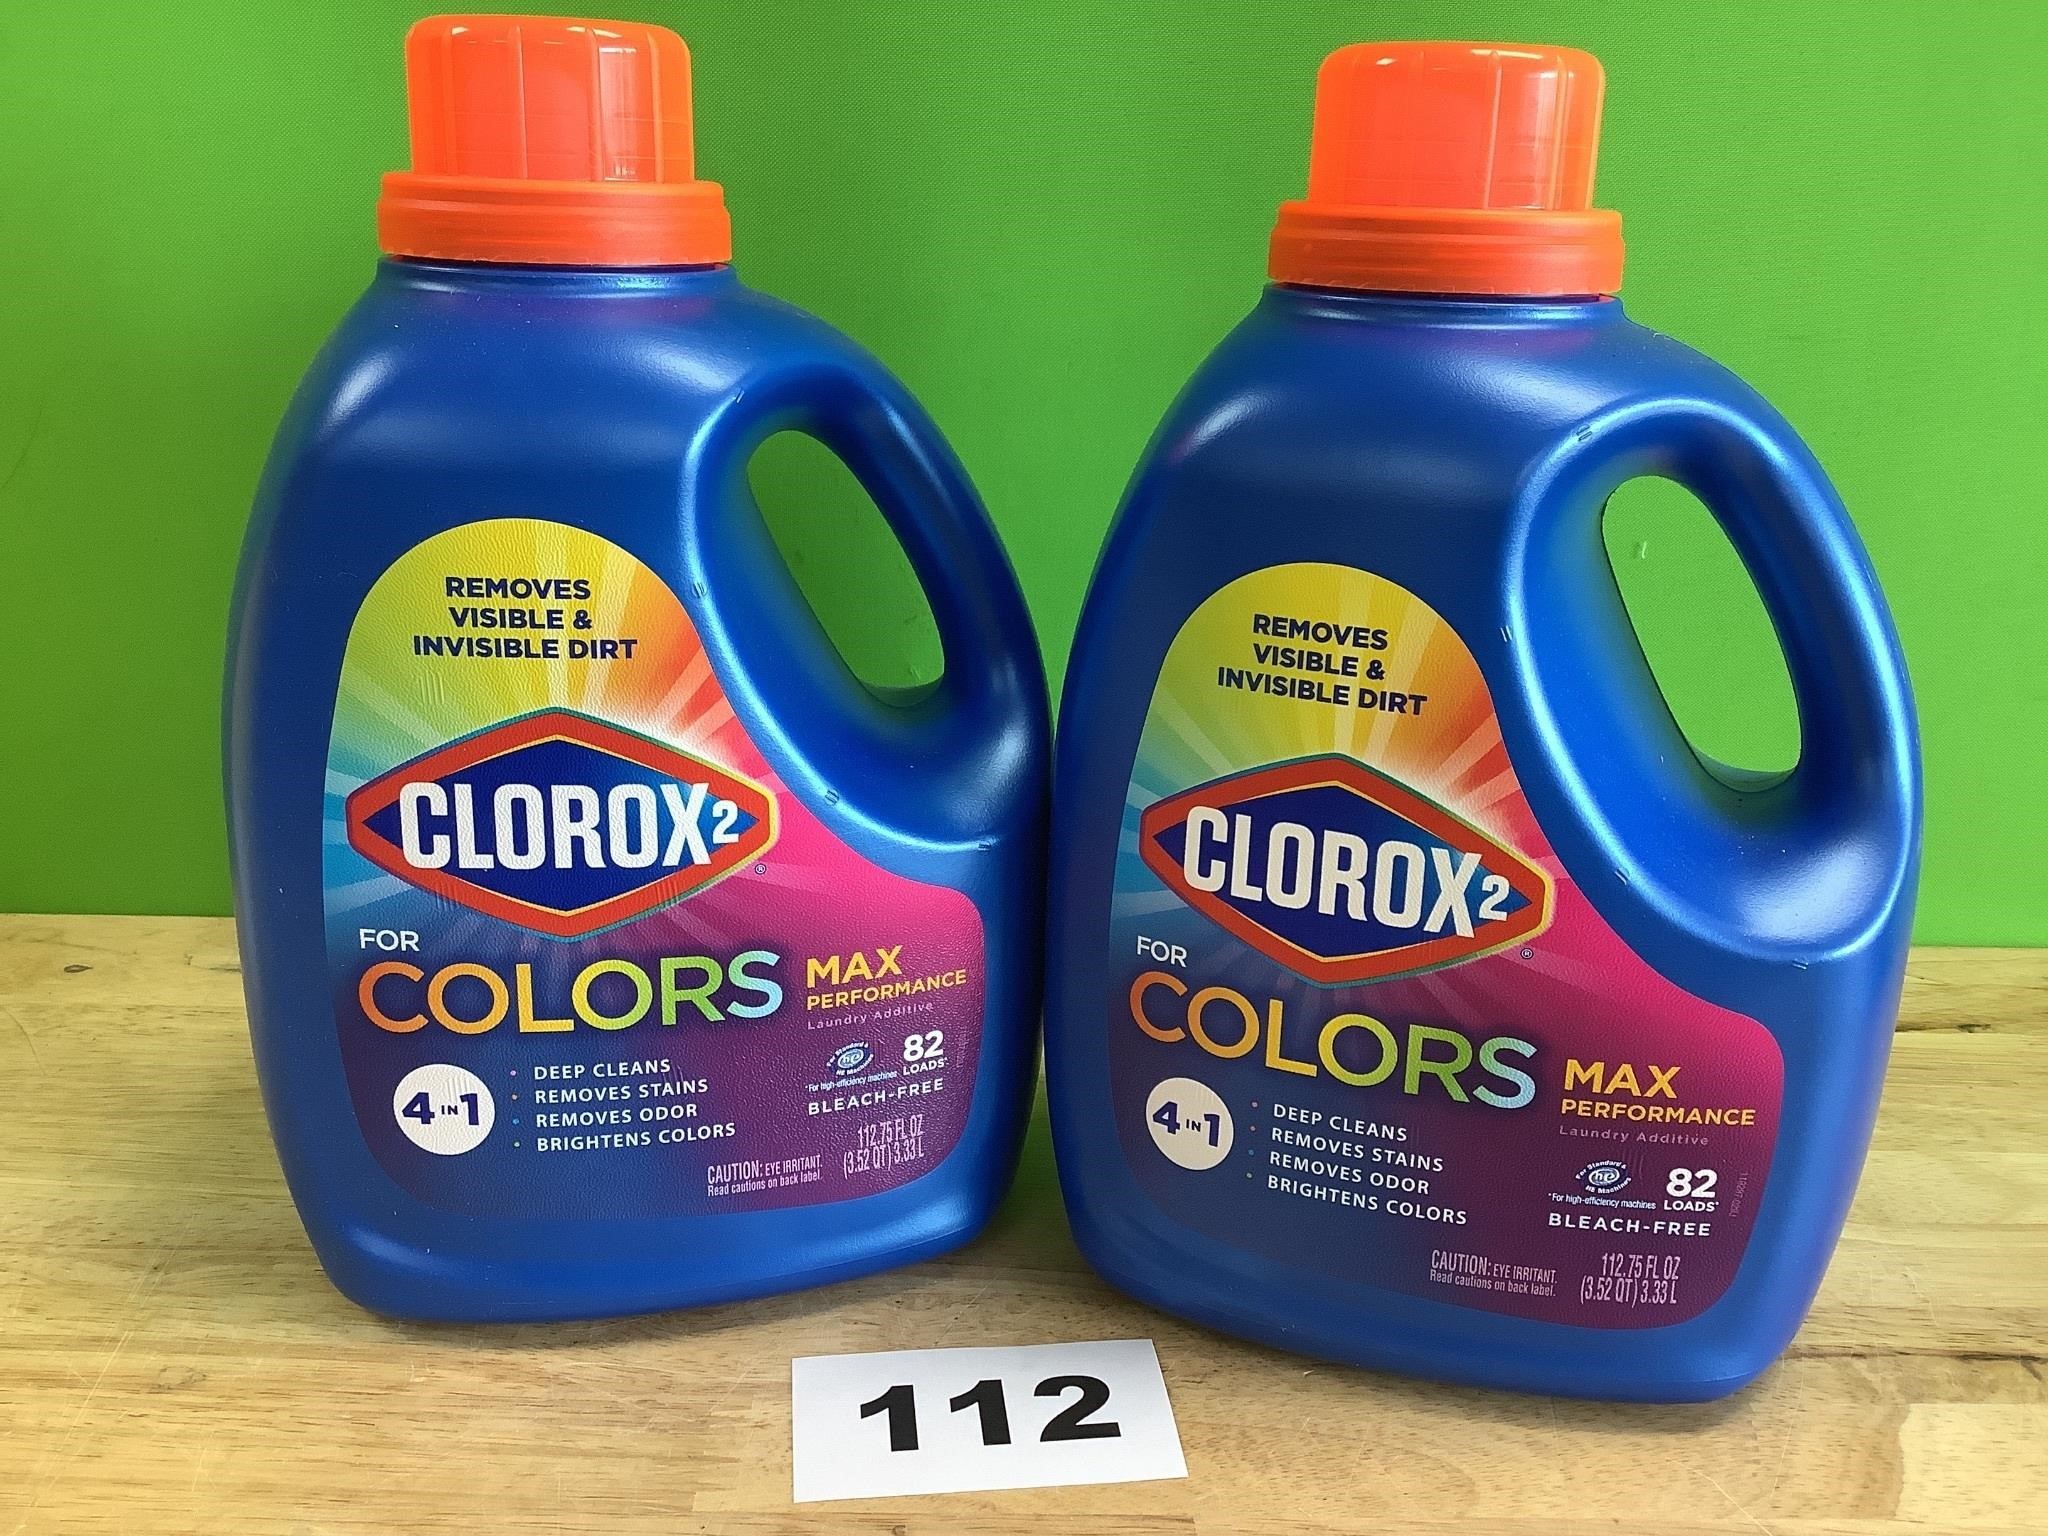 Clorox2 for Colors lot of 2